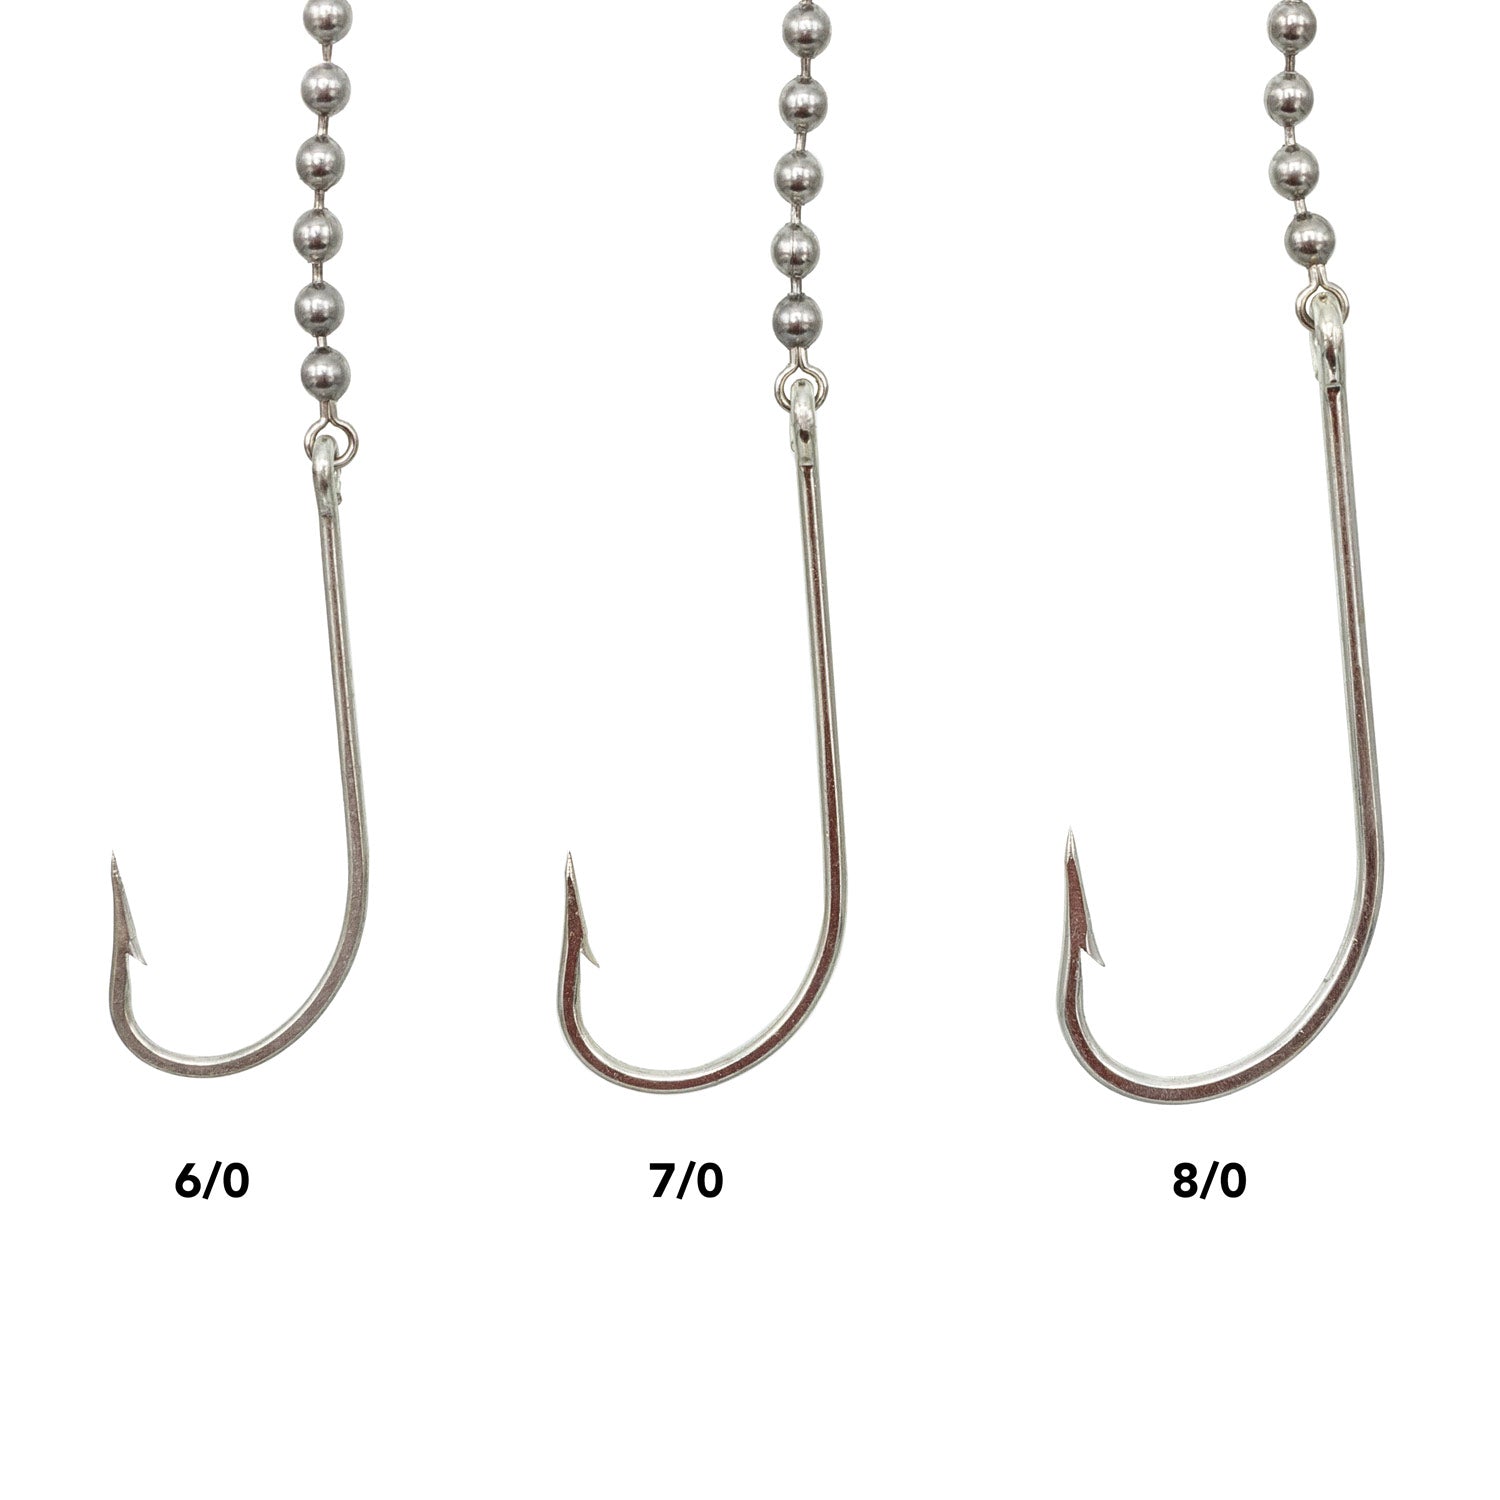 Trolling Sinkers with Stainless Steel Bead Chain 3/4oz